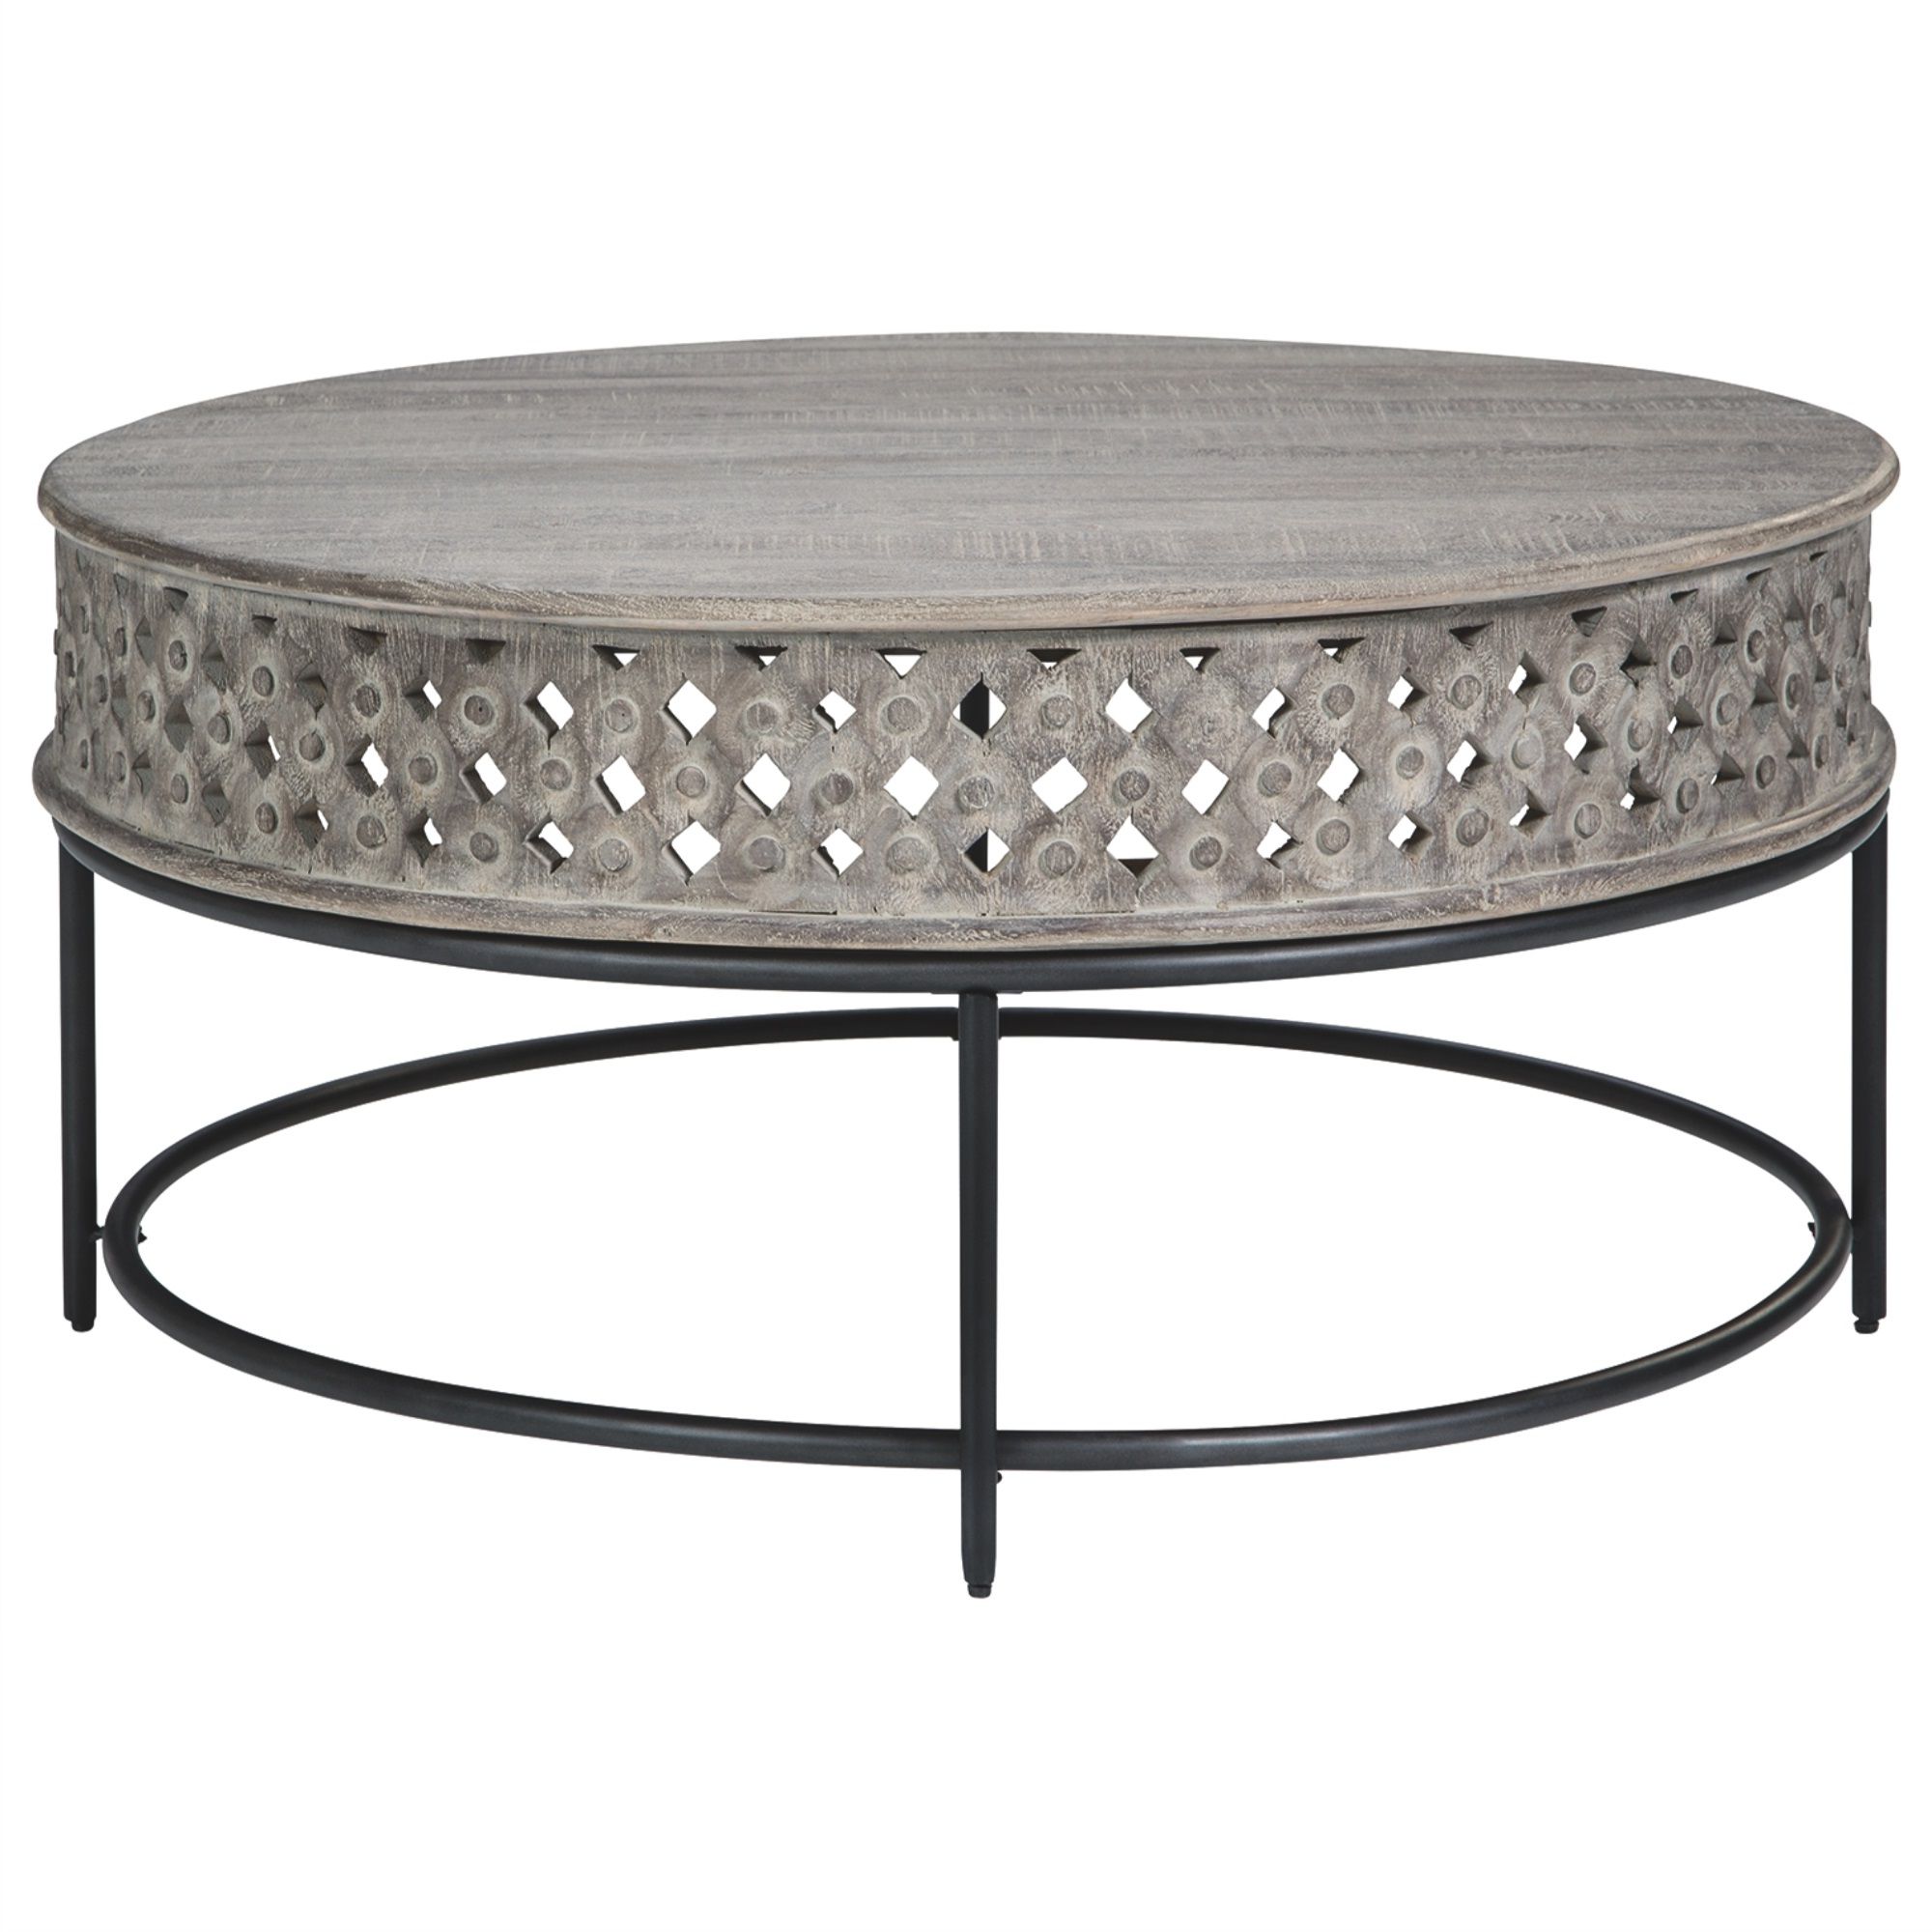 Gray Wood Veneer Cocktail Tables Regarding Famous Wooden Round Cocktail Table With Hand Carved Lattice (View 16 of 20)